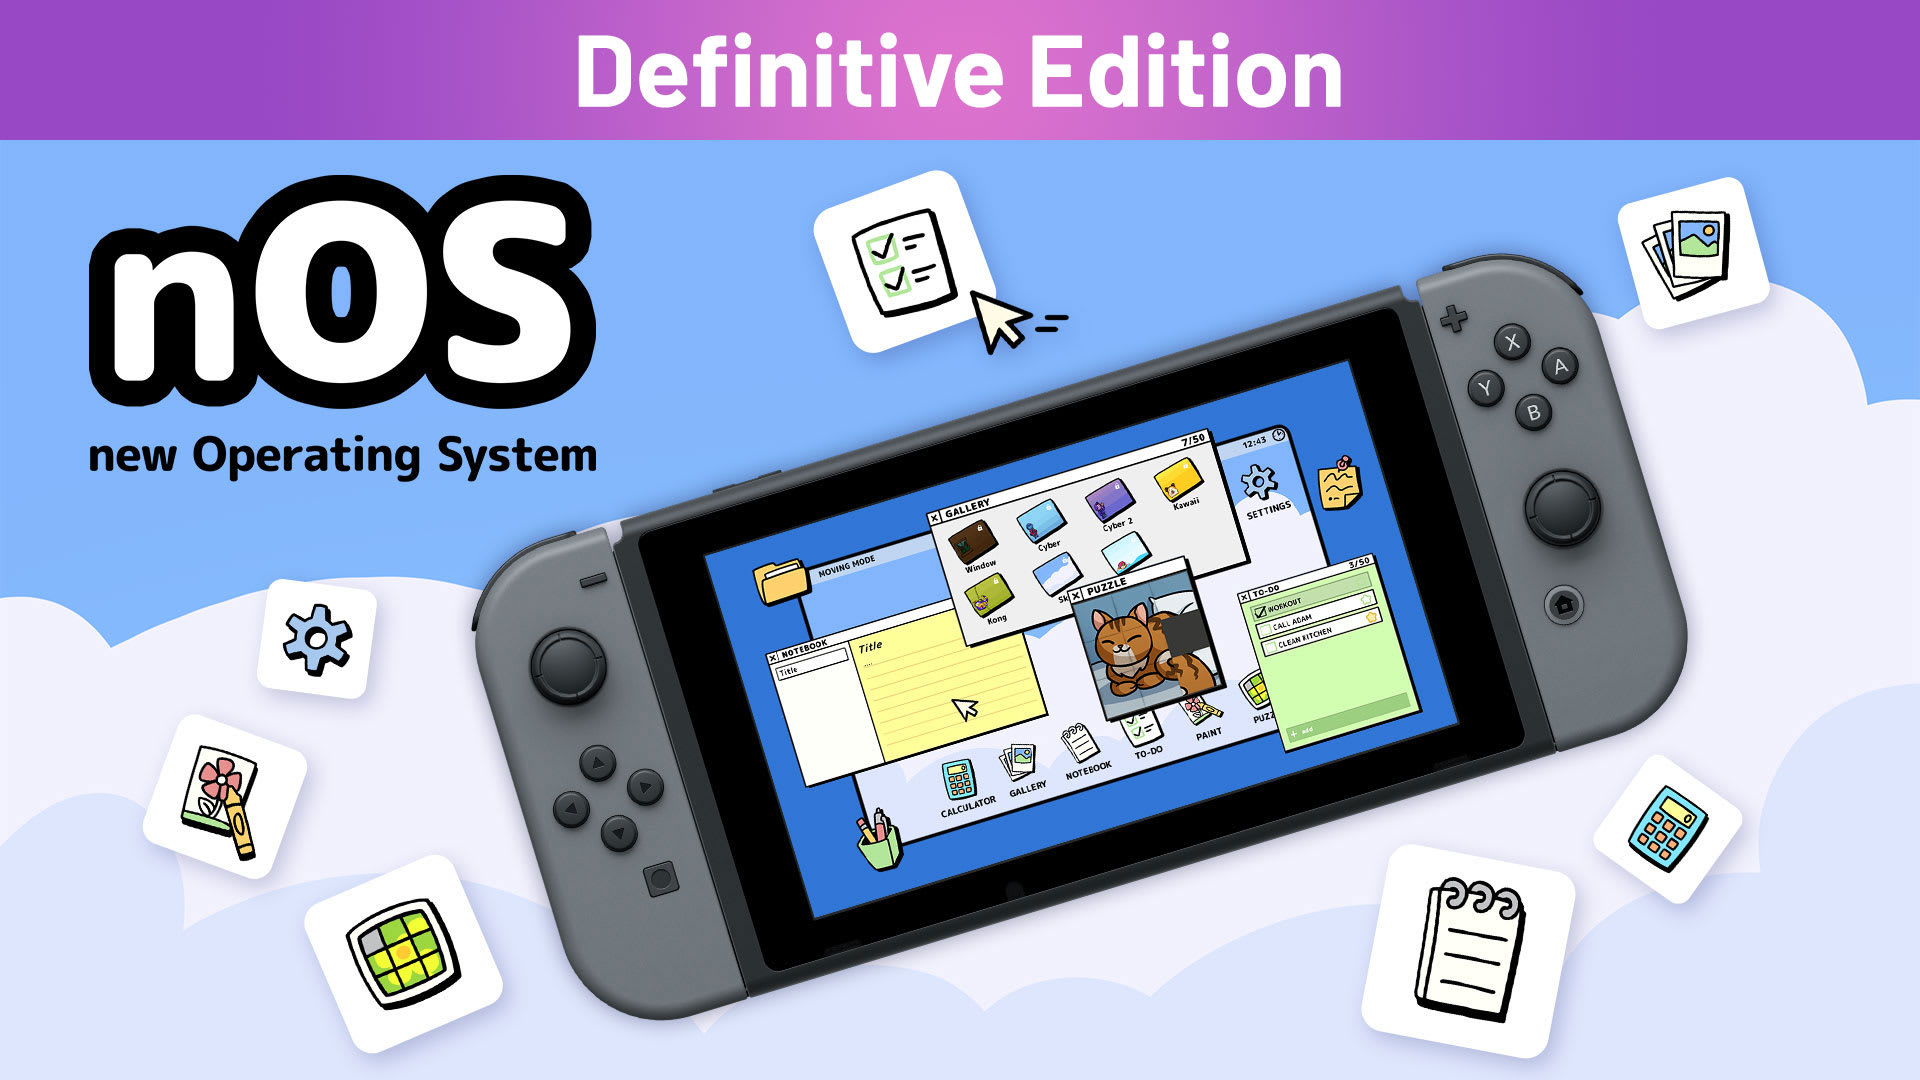 nOS new Operating System Definitive Edition 1